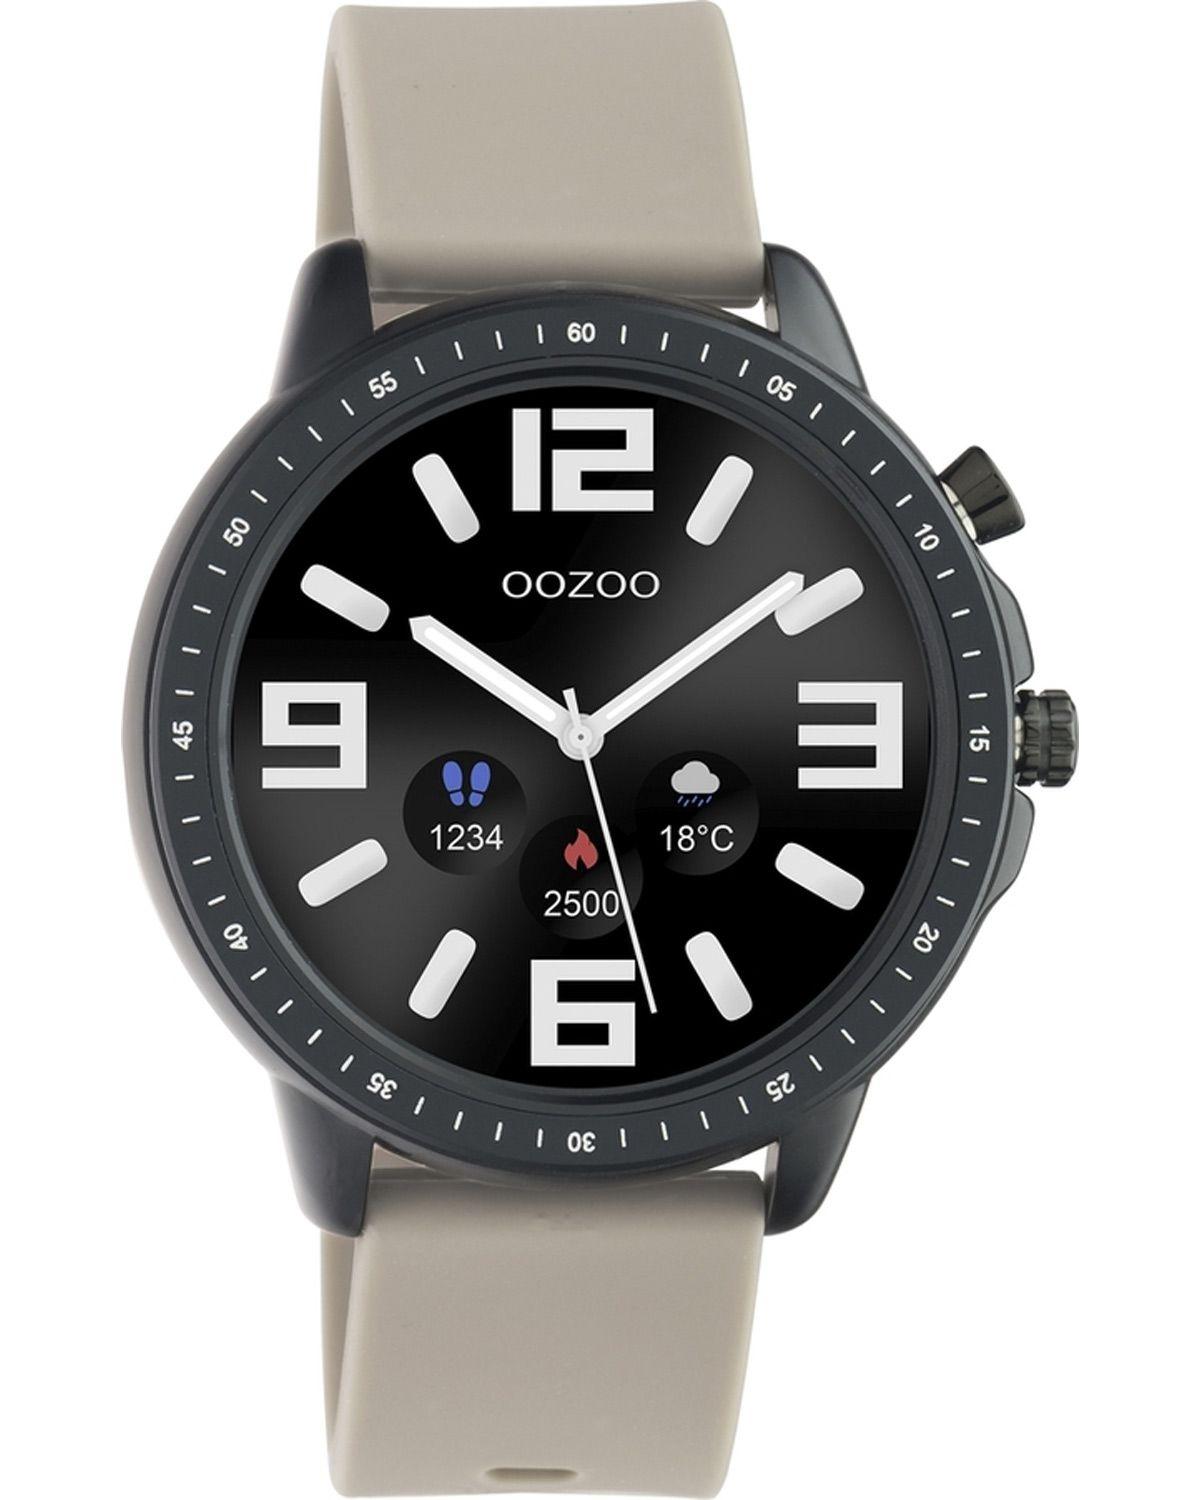 OOZOO Smartwatch - Q00330, Black case with Brown Rubber Strap